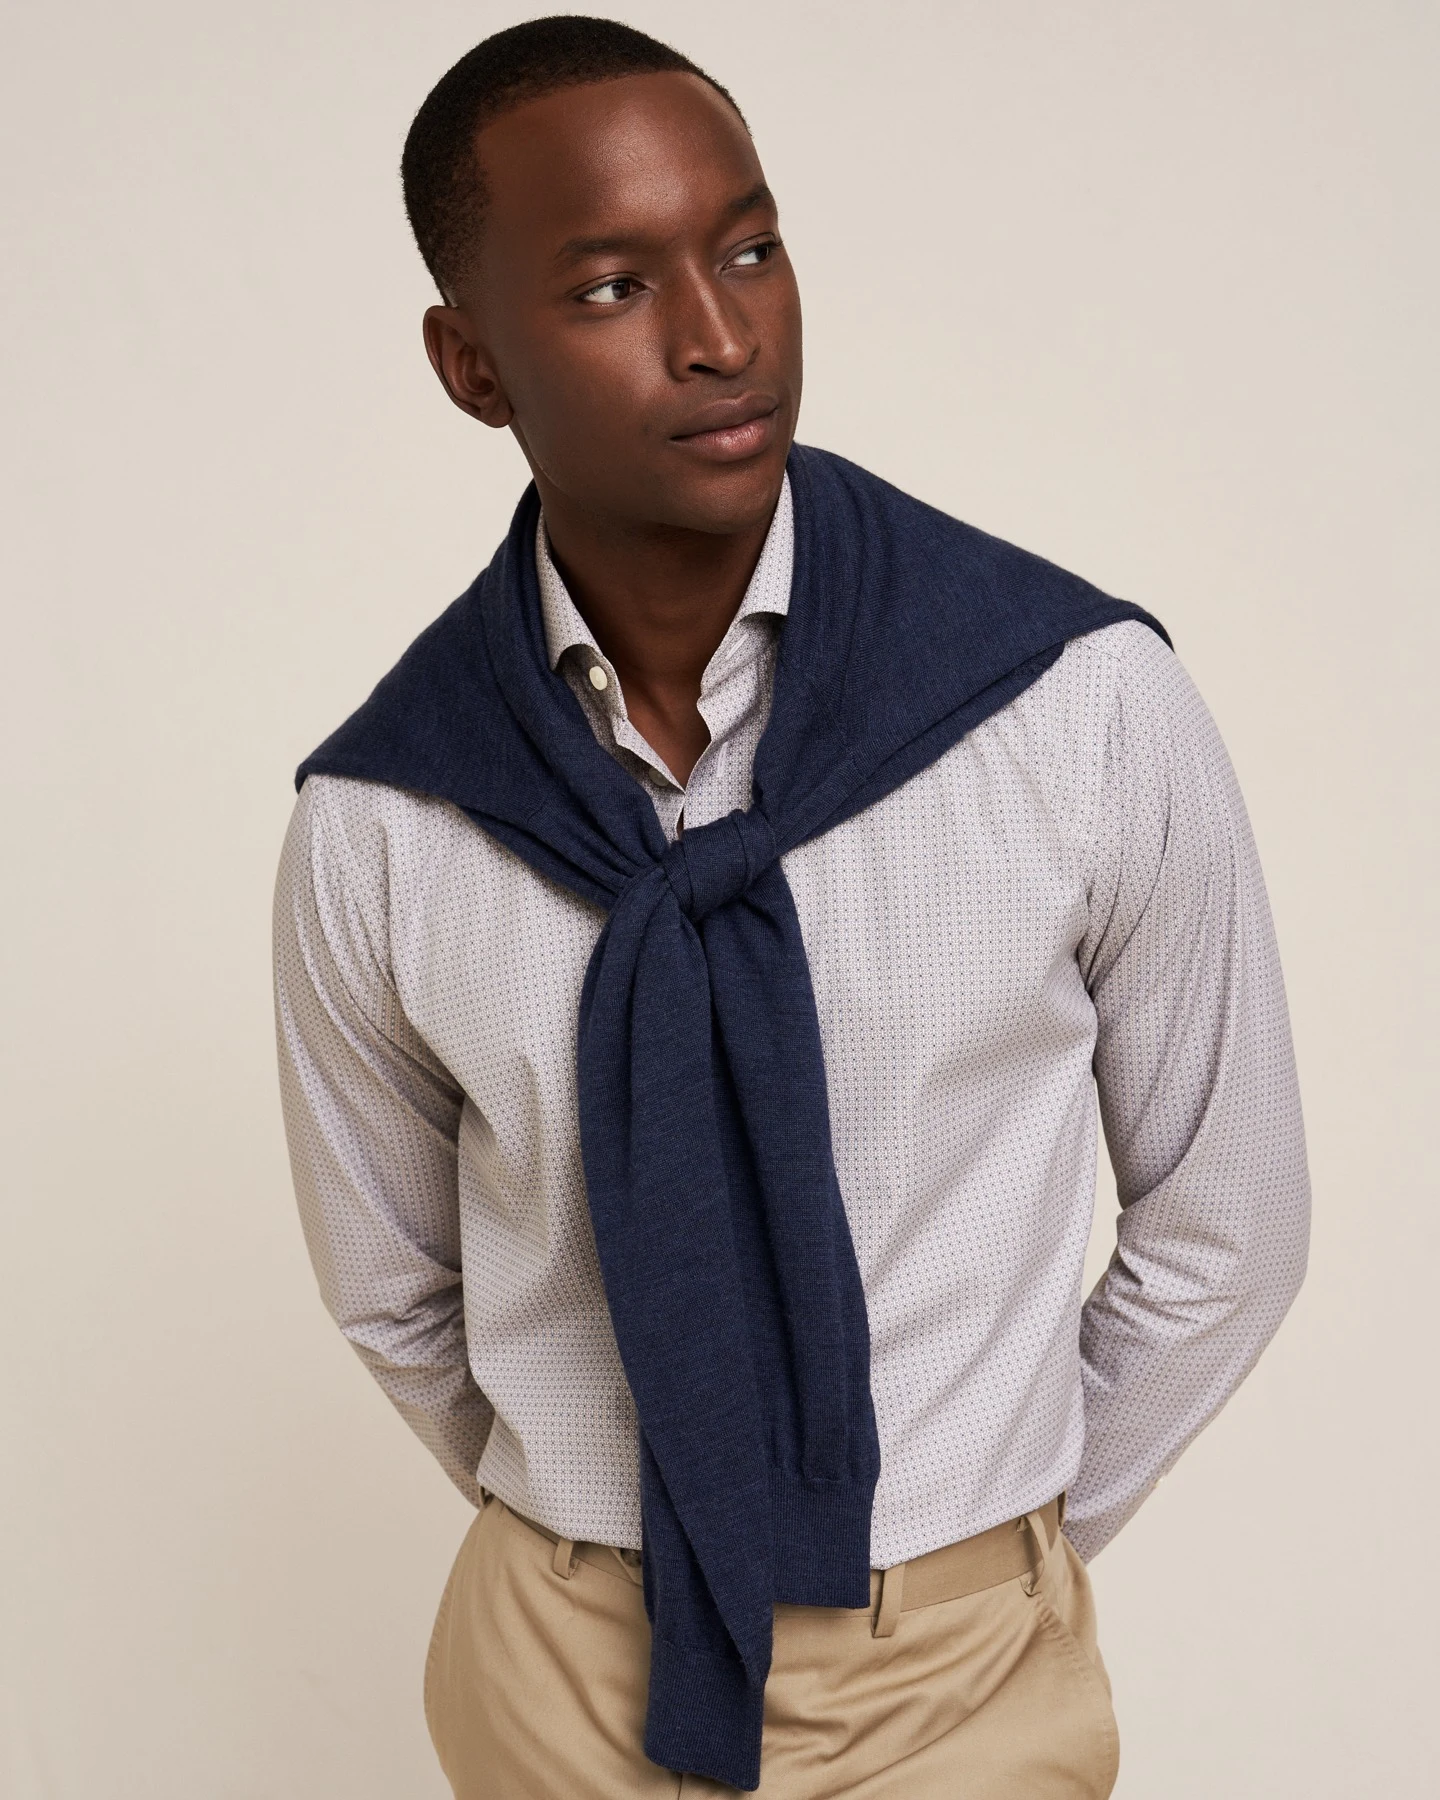 model in eton archive shirt and knit sweater over shoulders